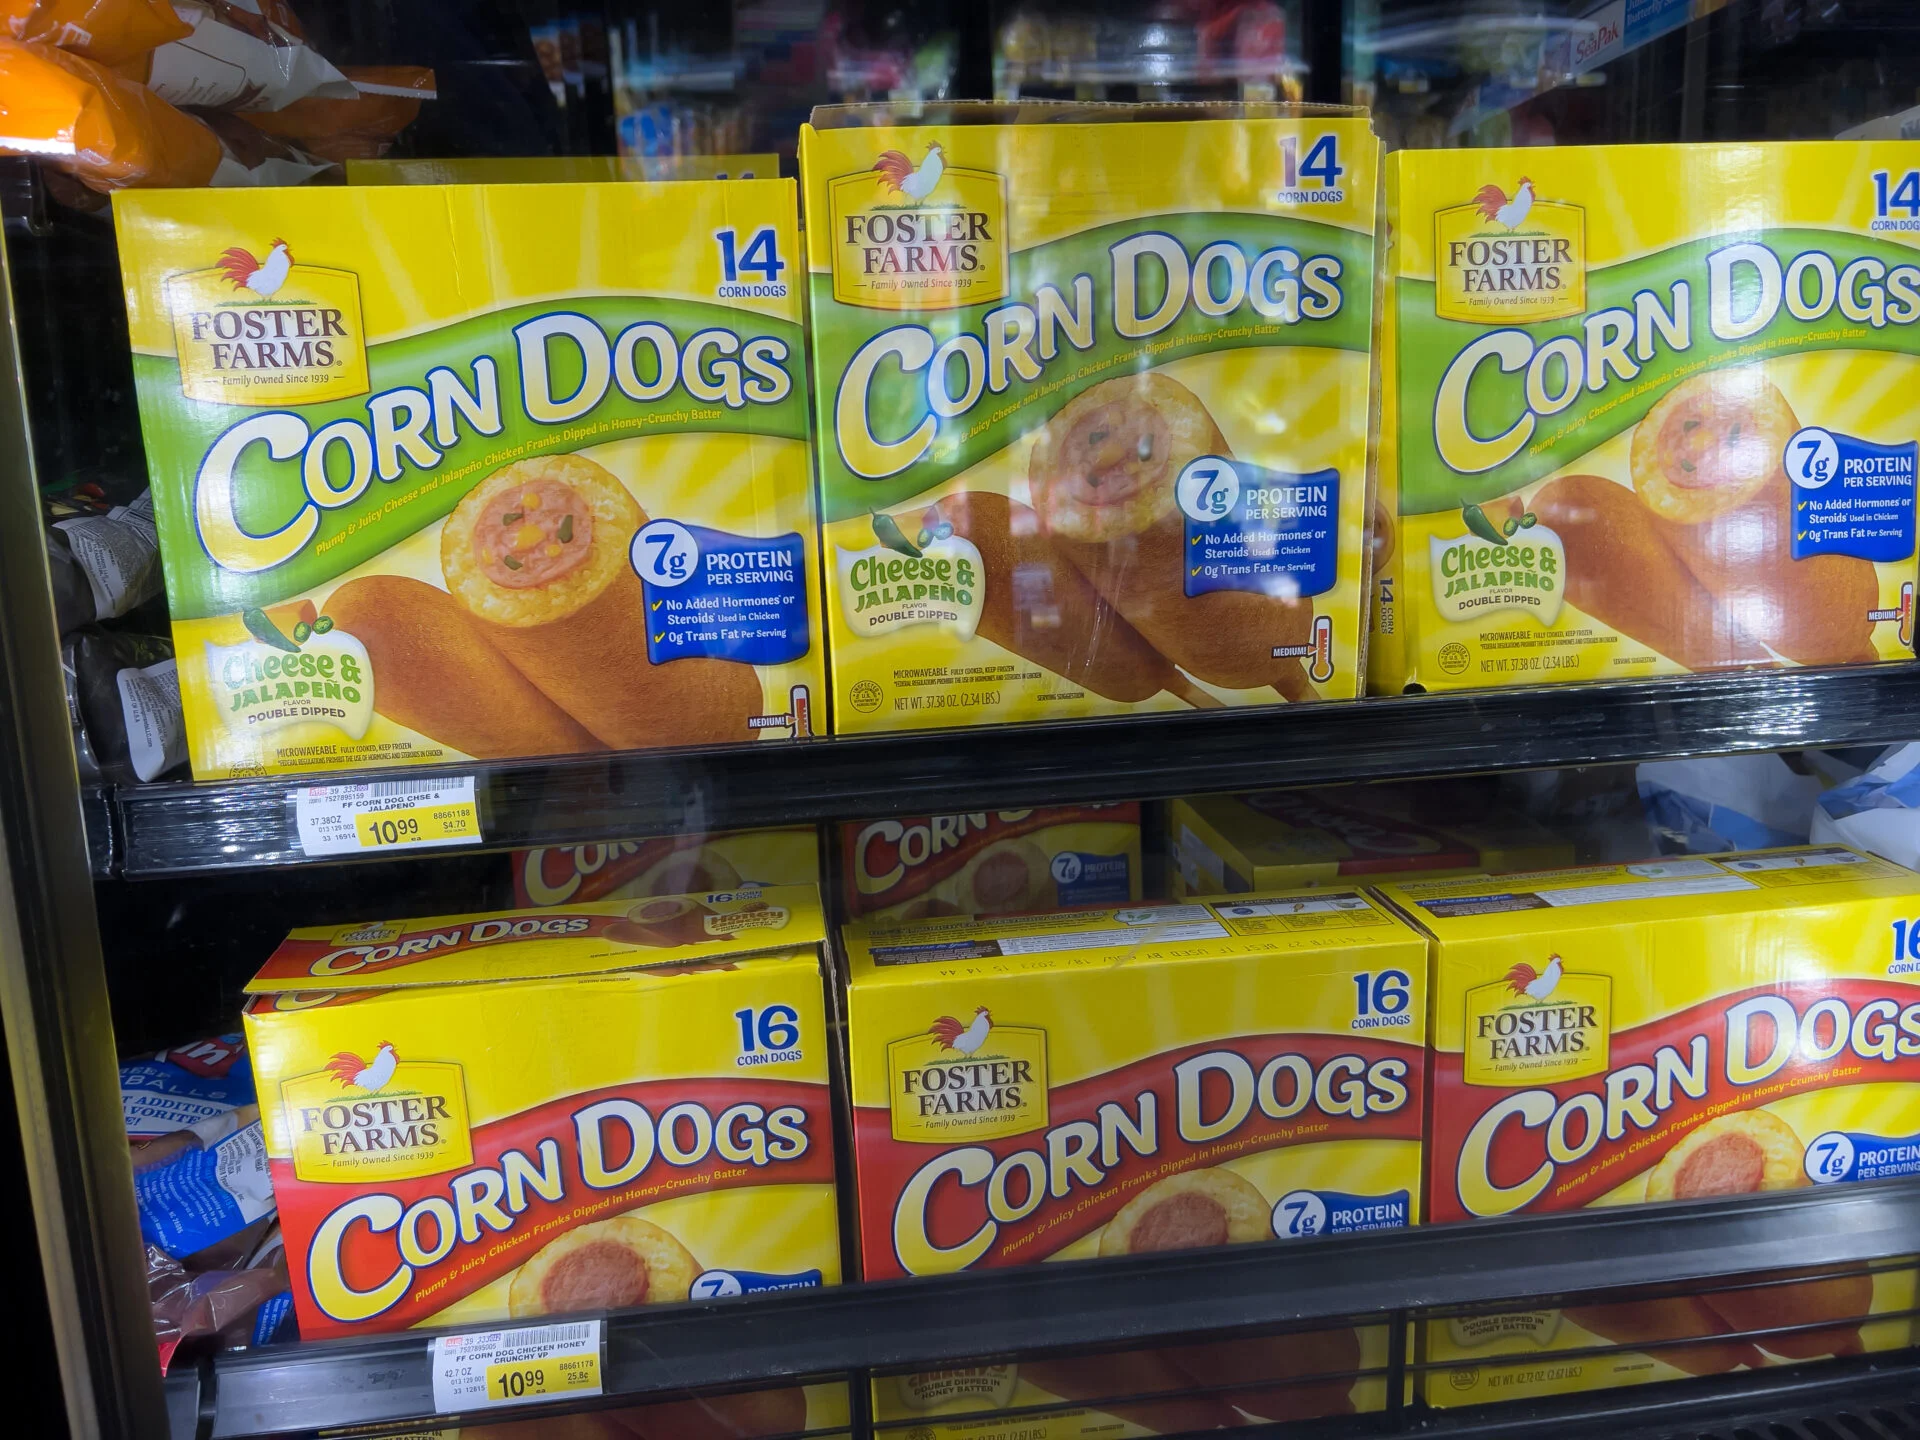 Processed food corn dogs likely containing phthalates